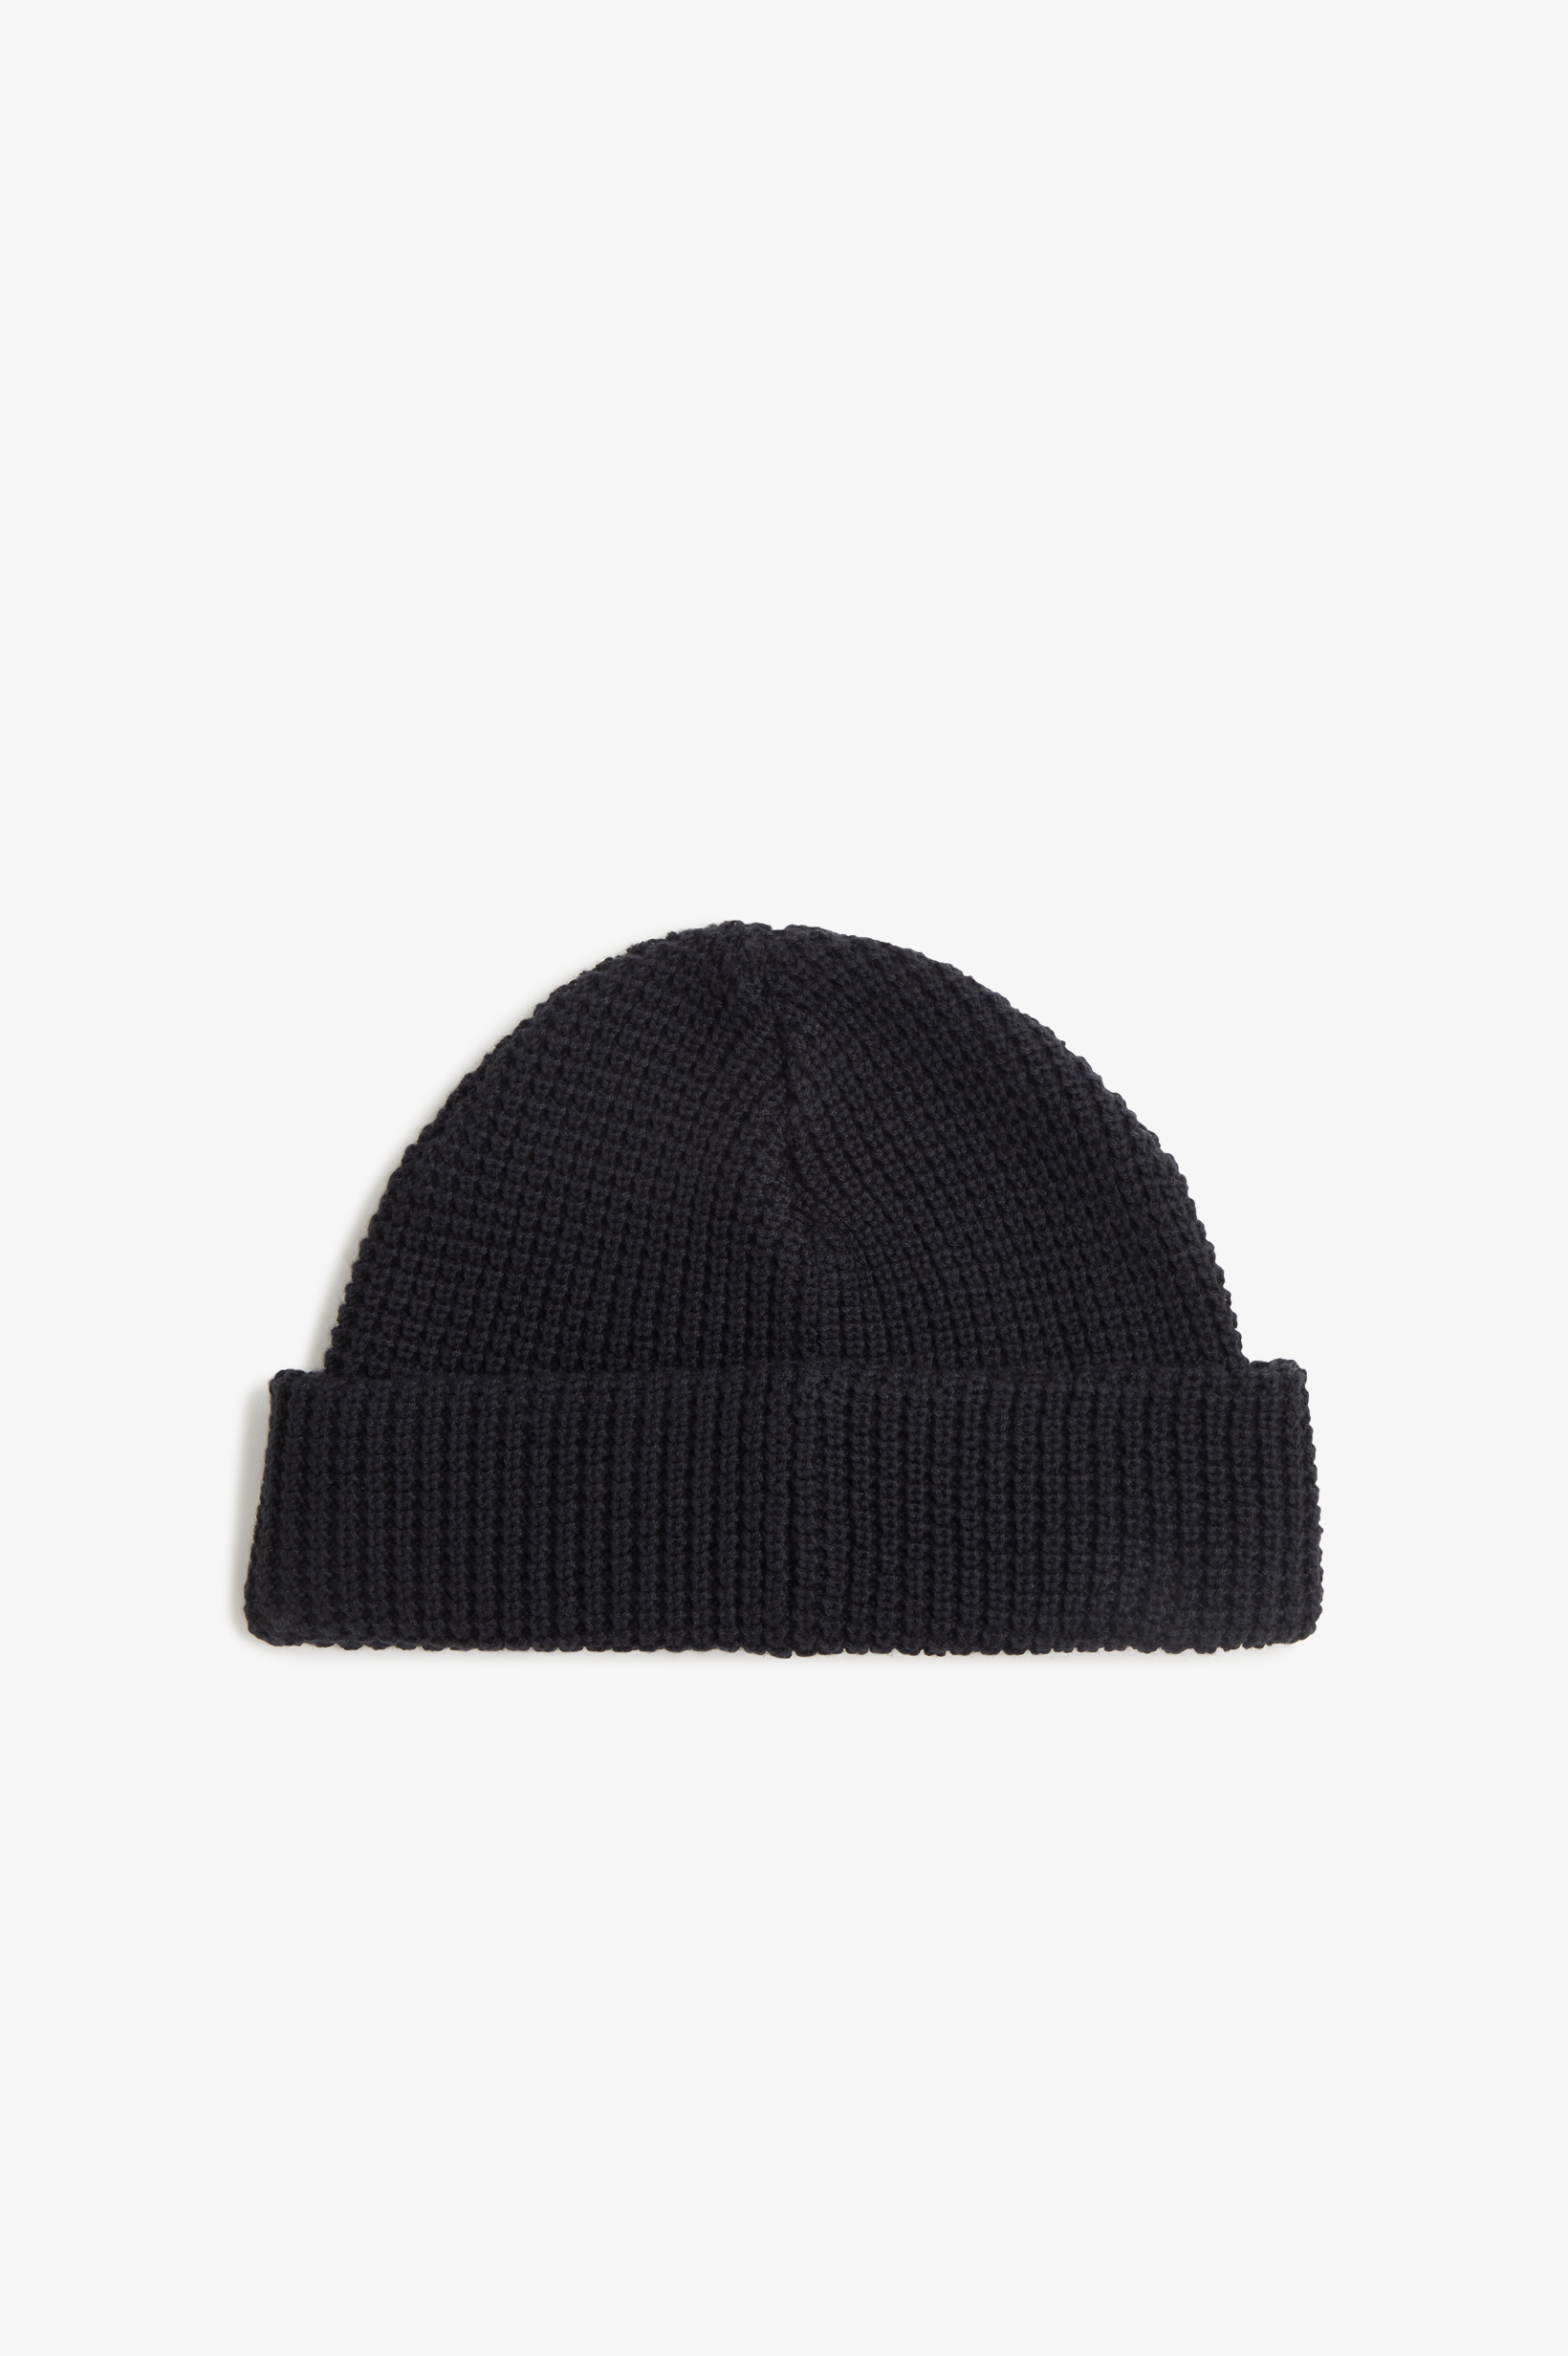 Fred Perry - PATCH BRAND WAFFLE KNIT BEANIE - Black/Oatmeal